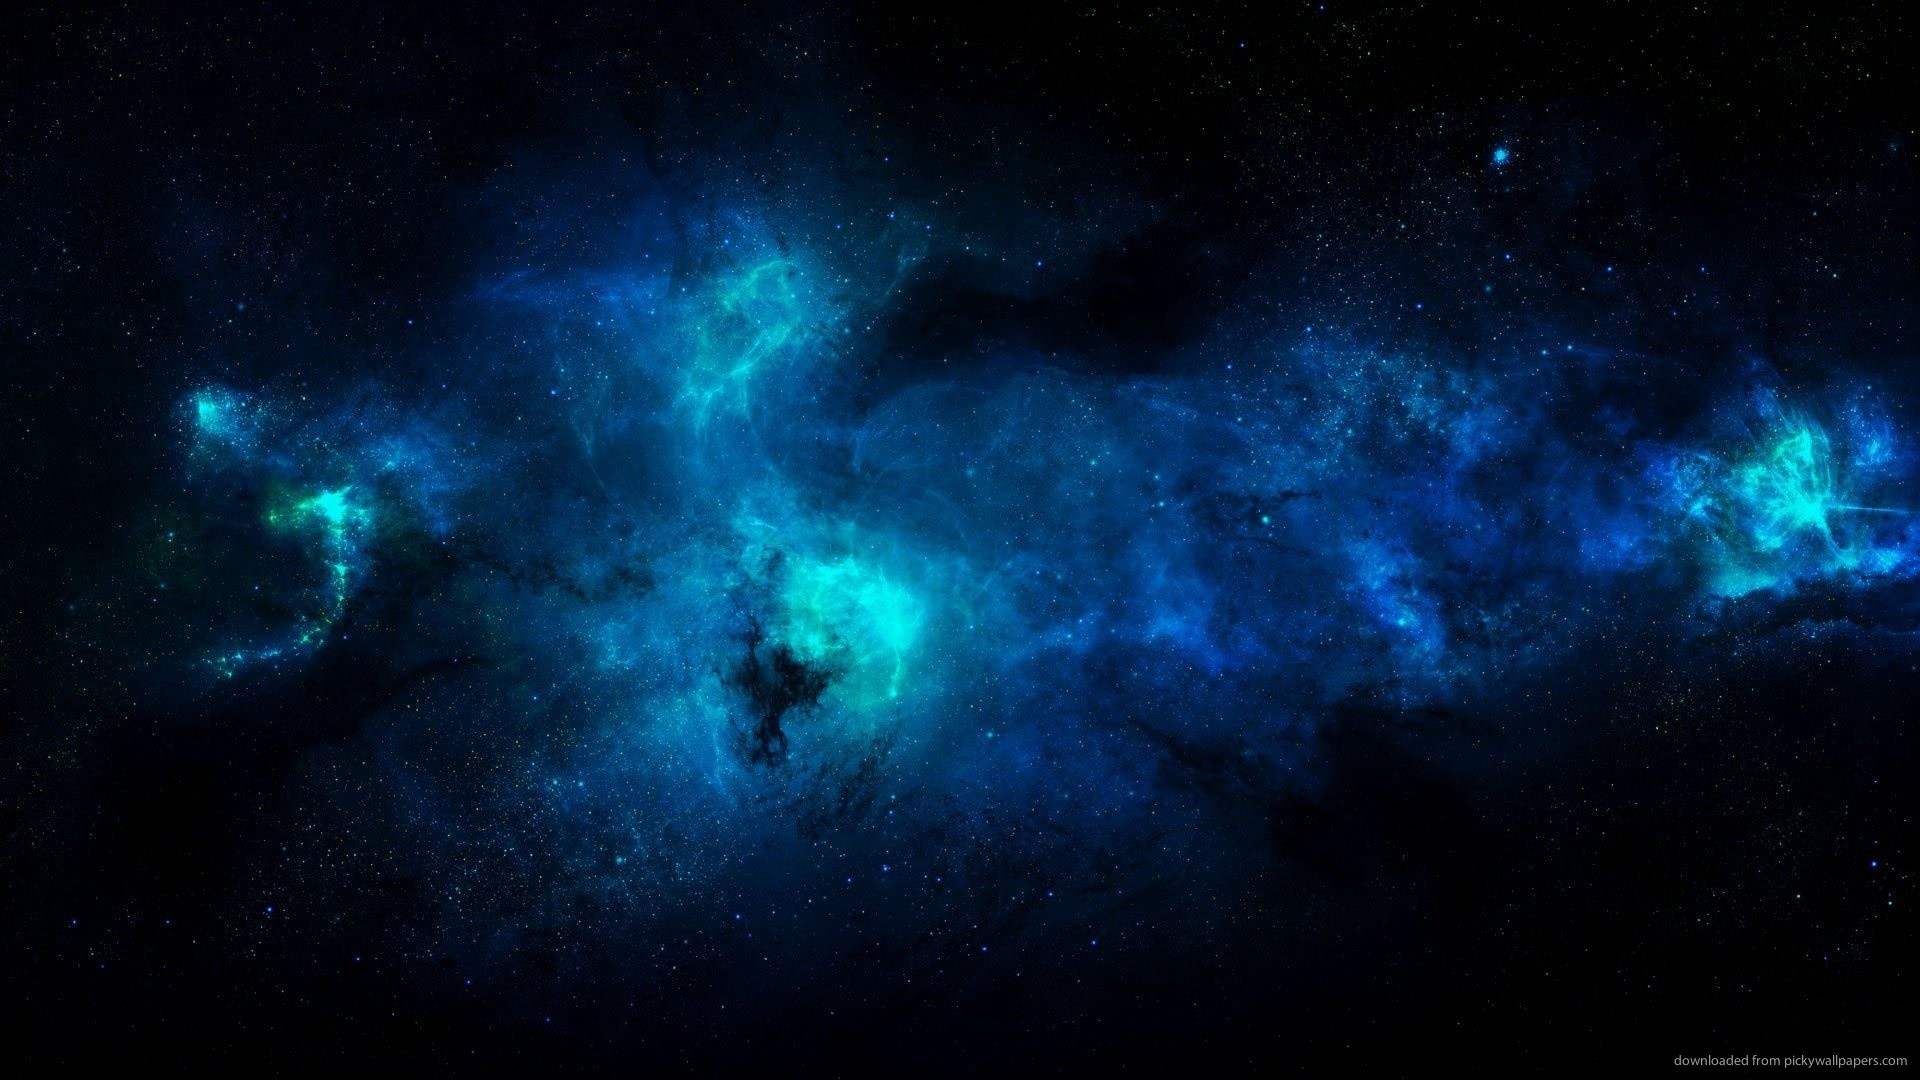 Space Wallpaper 1366x768 77 Pictures